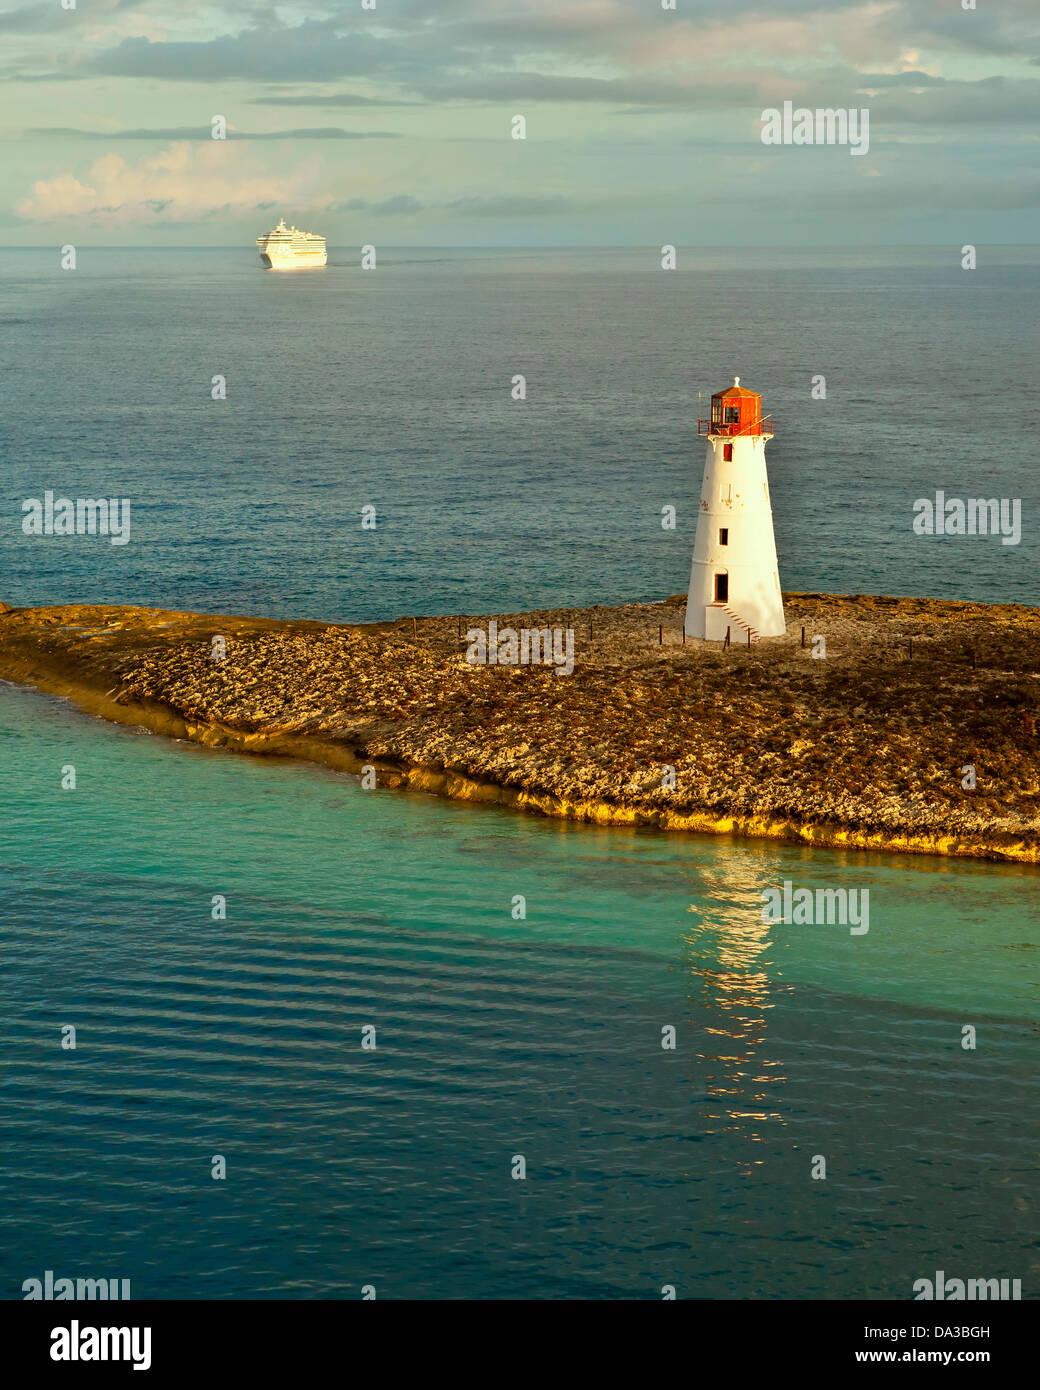 Coming Into Port Stock Photos & Coming Into Port Stock Images - Alamy